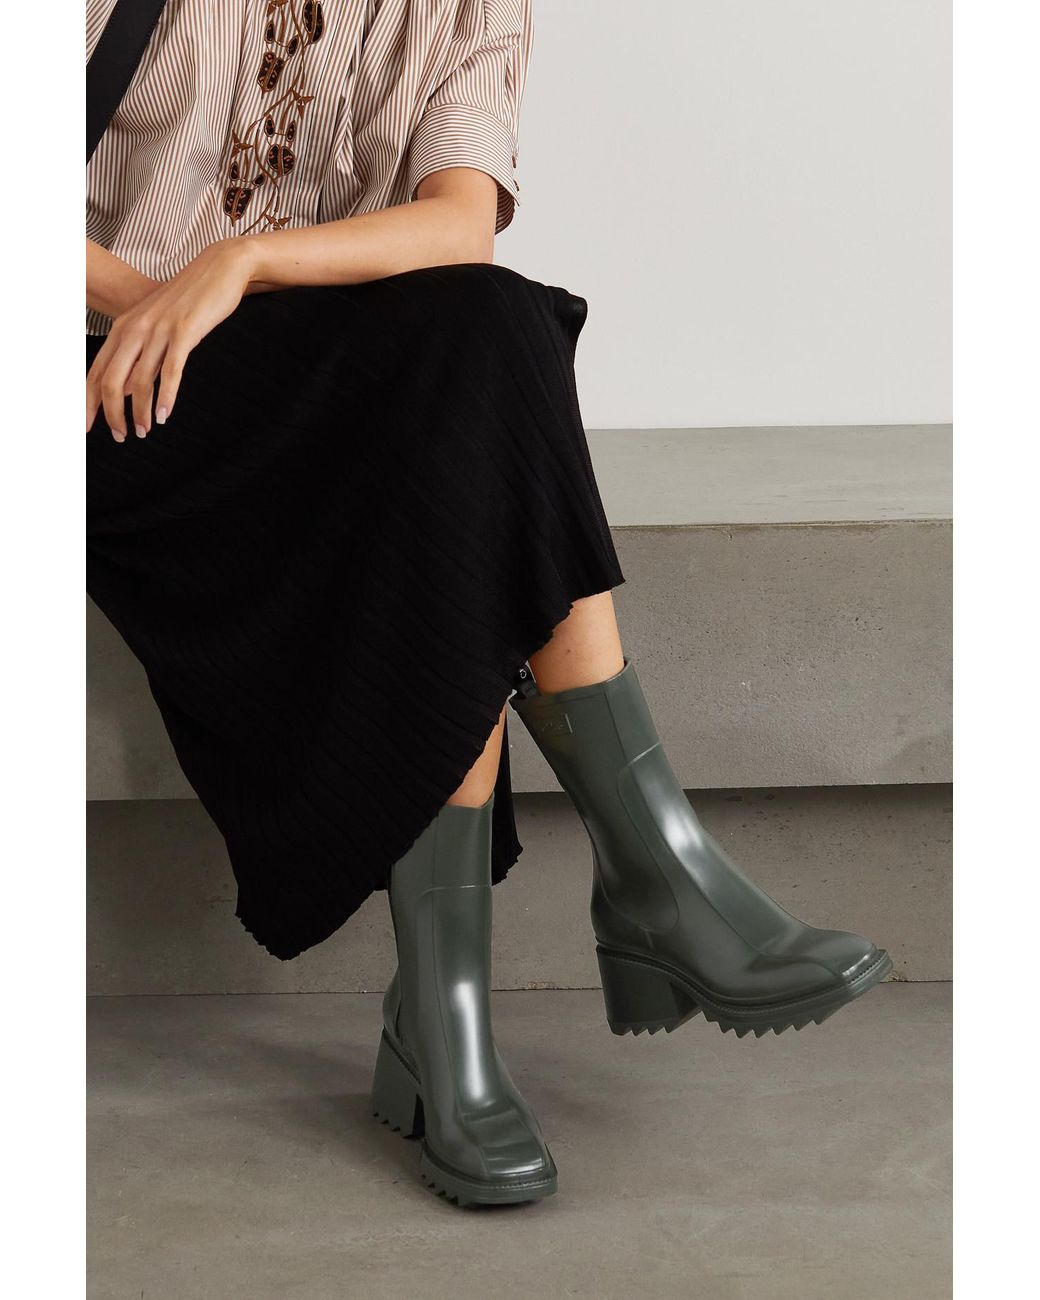 Chloé Betty Logo-embossed Rubber Boots in Green | Lyst